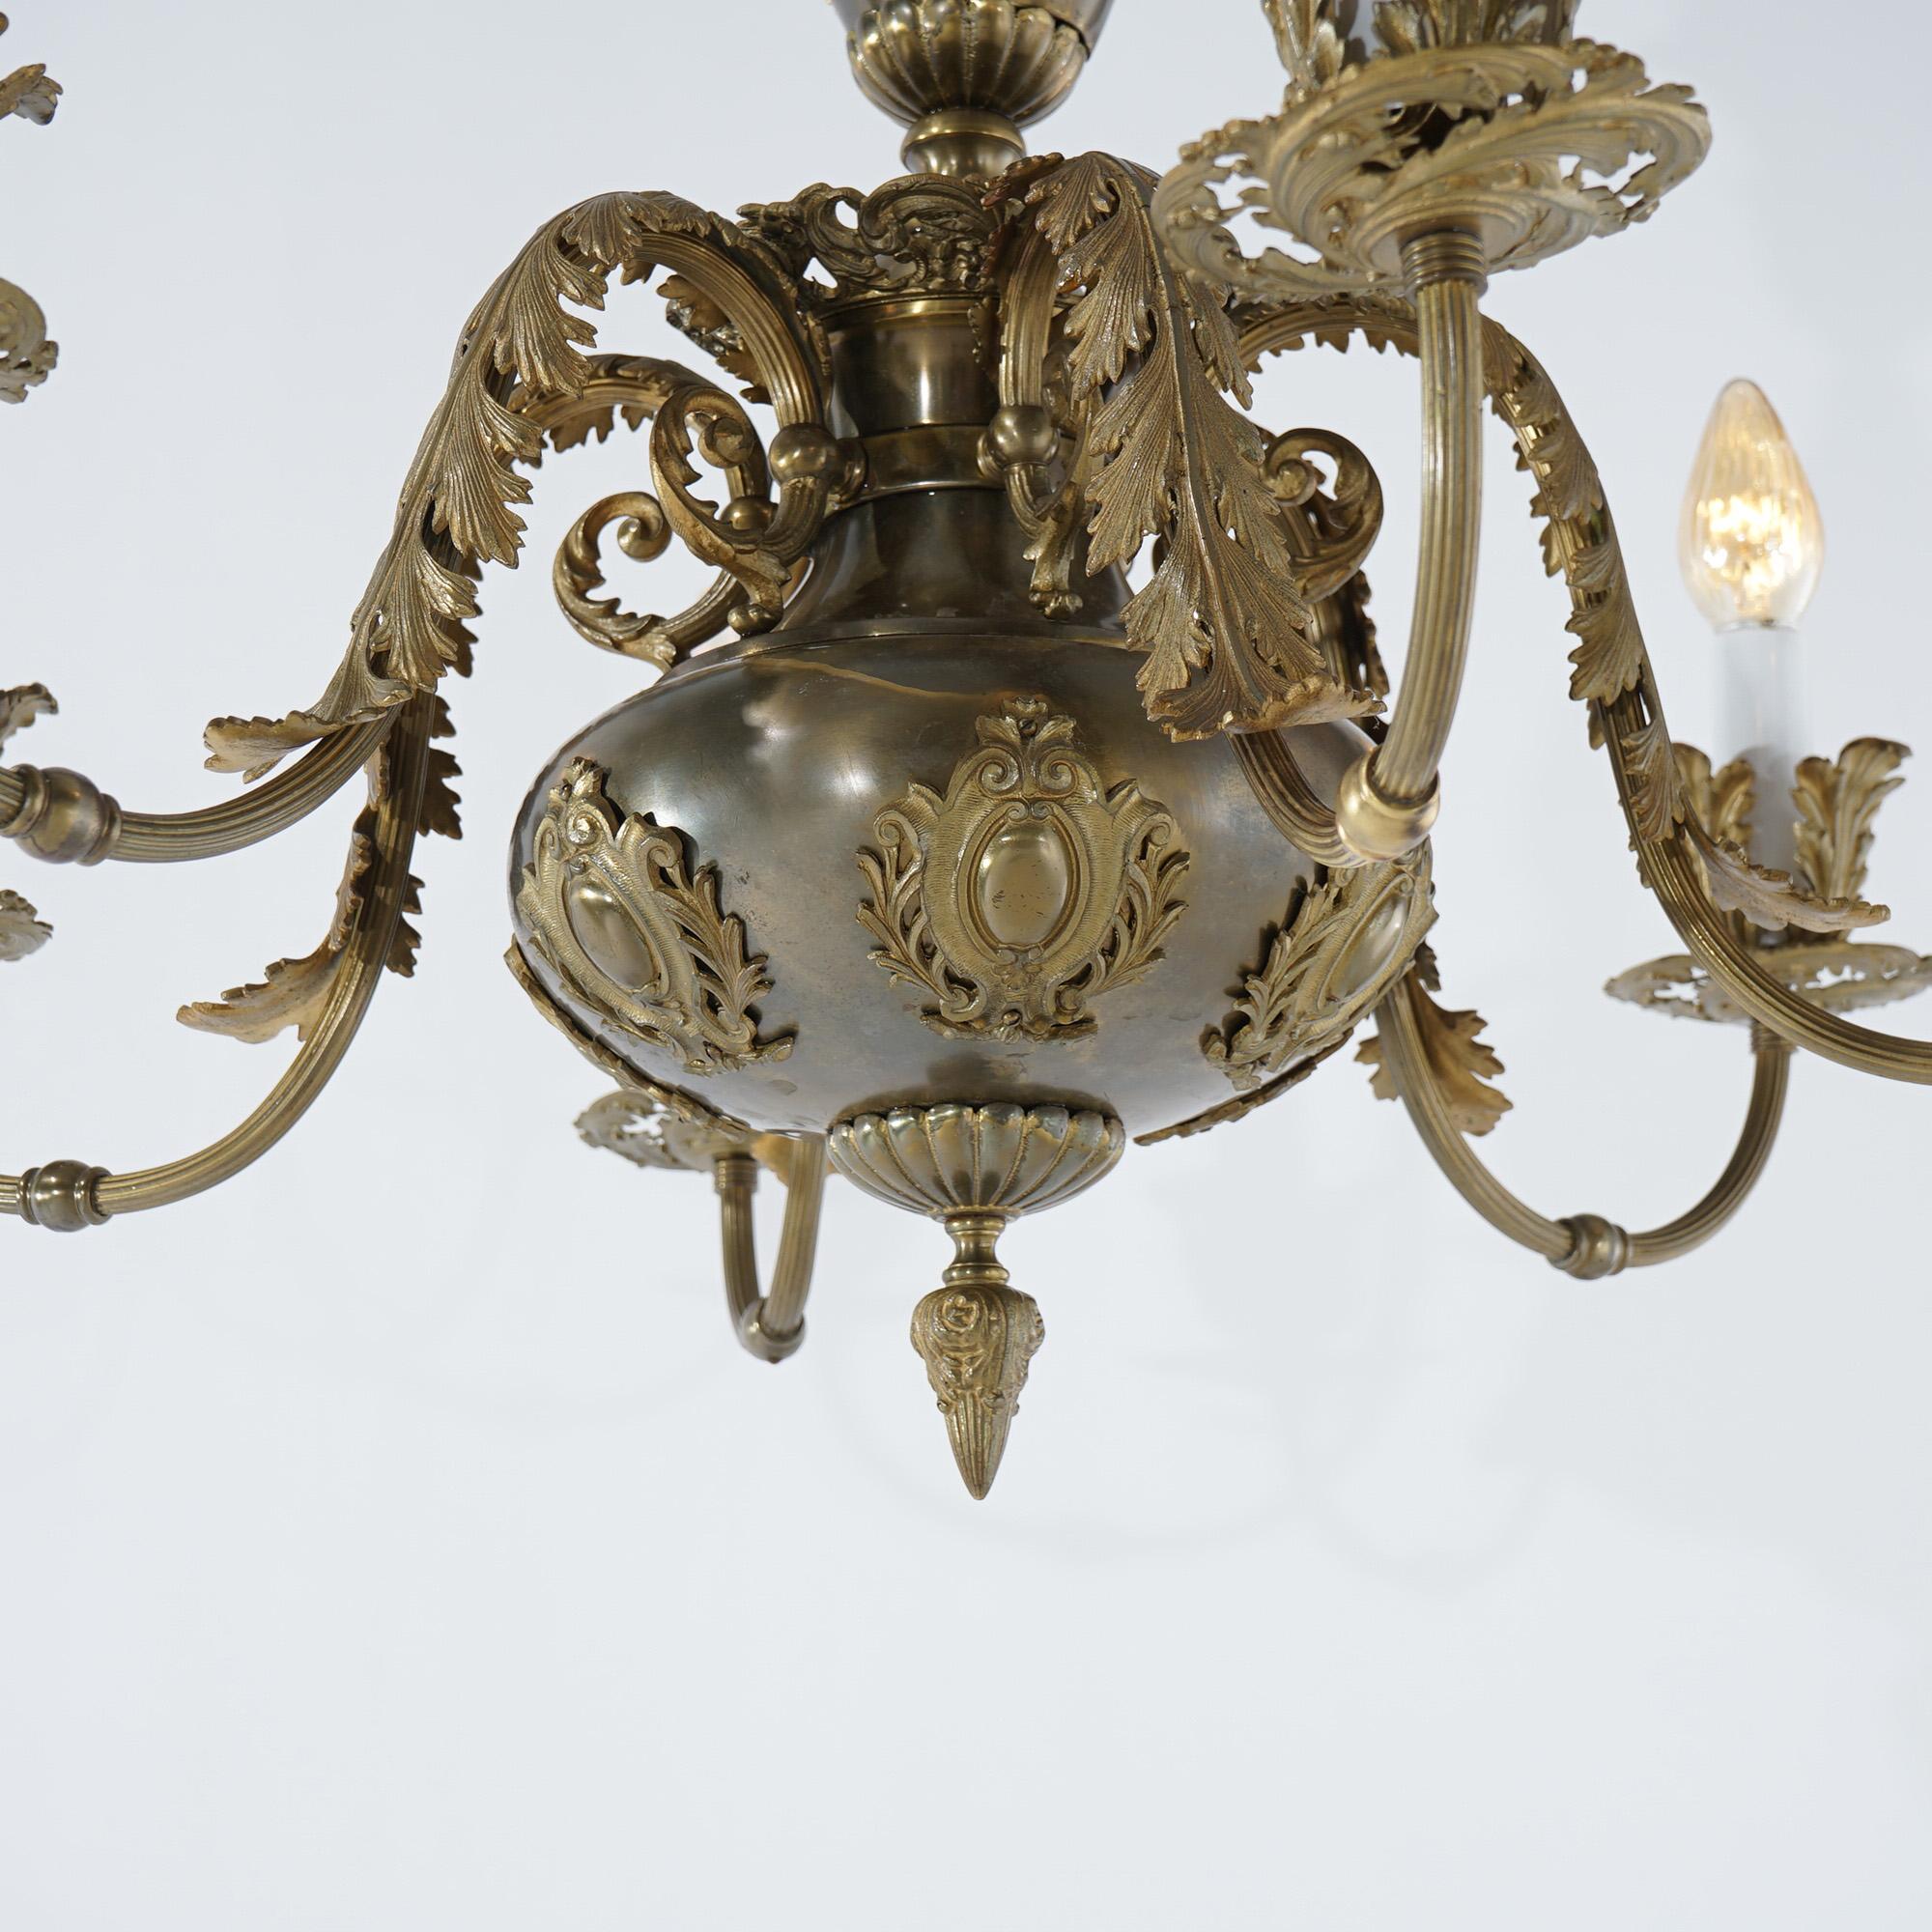 A large French Louis XV style chandelier offers brass and bronze construction with font having stylized shield form medallions and six scrolled acanthus arms terminating in candle lights, c1940

Measures - 45